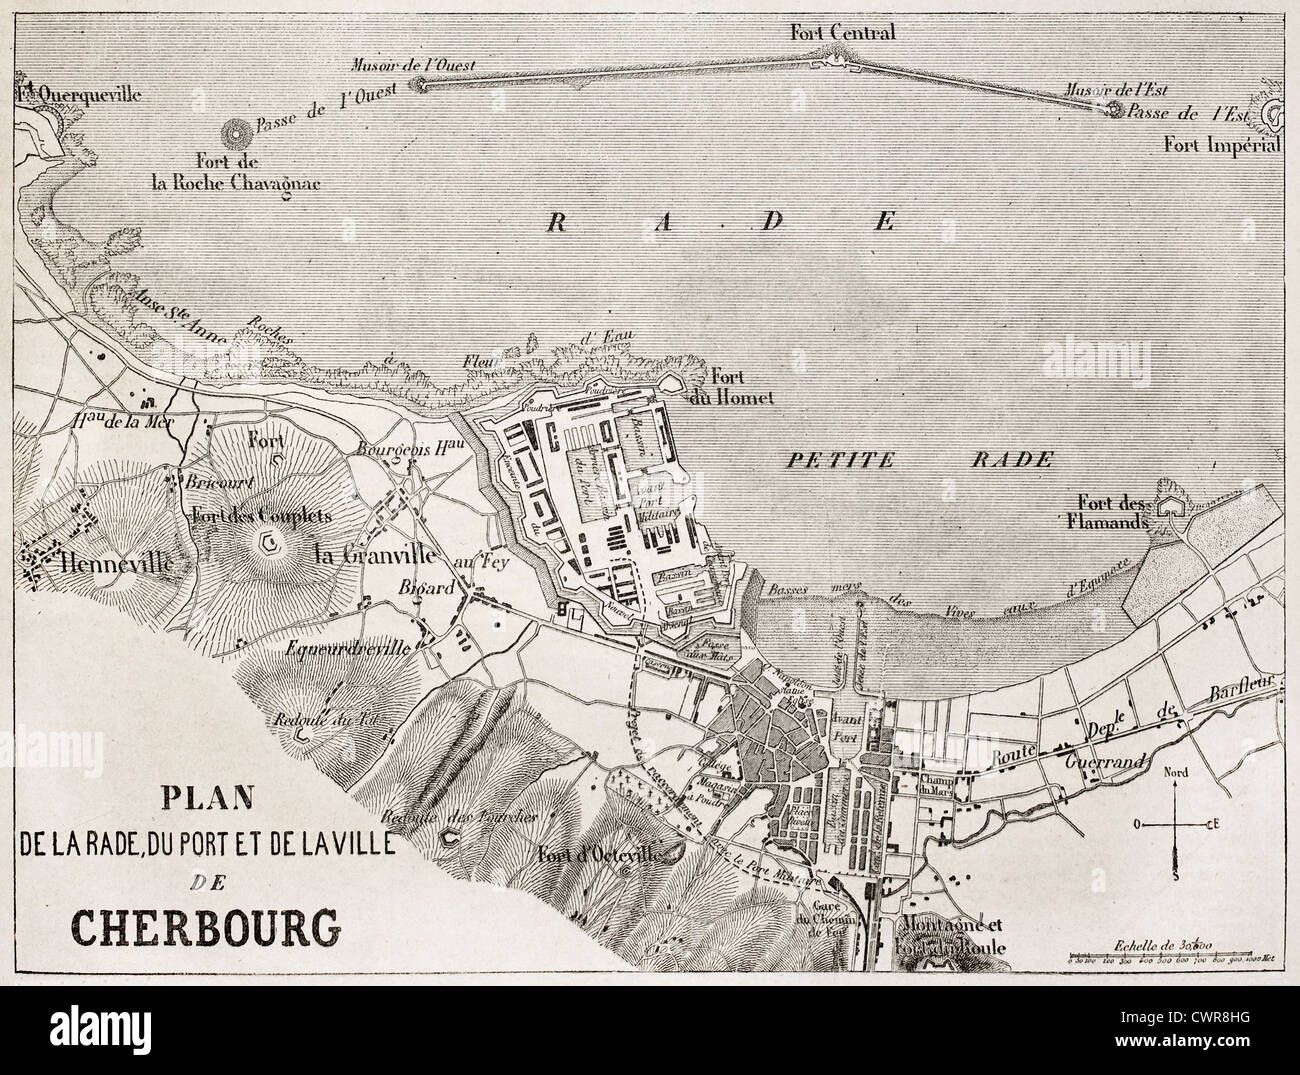 Cherbourg old plan, France. Stock Photo